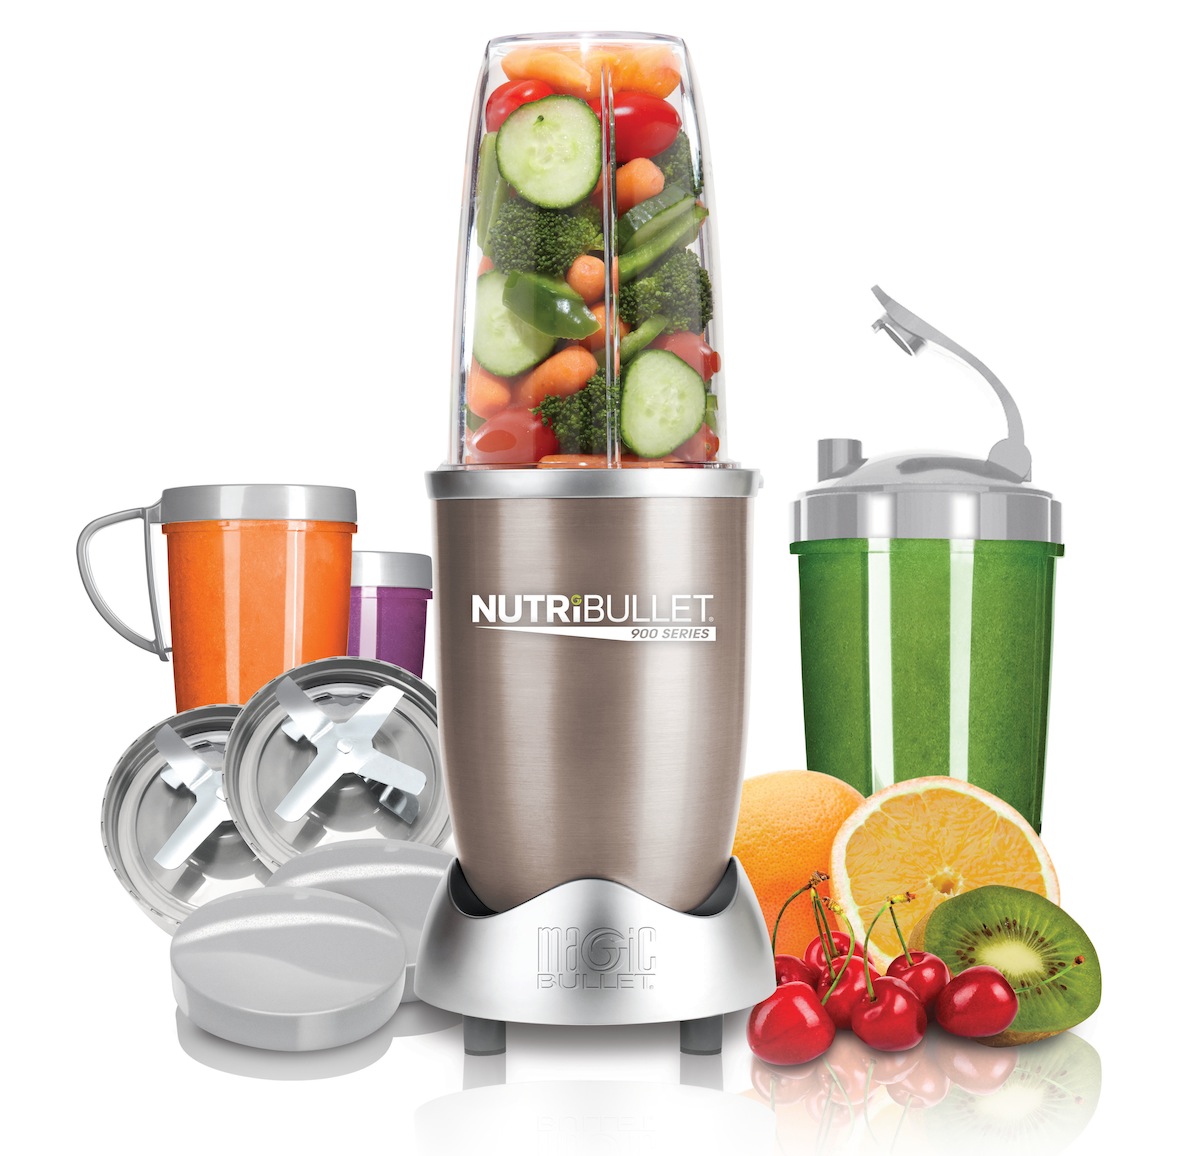 Are the consumer reviews for NutriBullet generally positive?